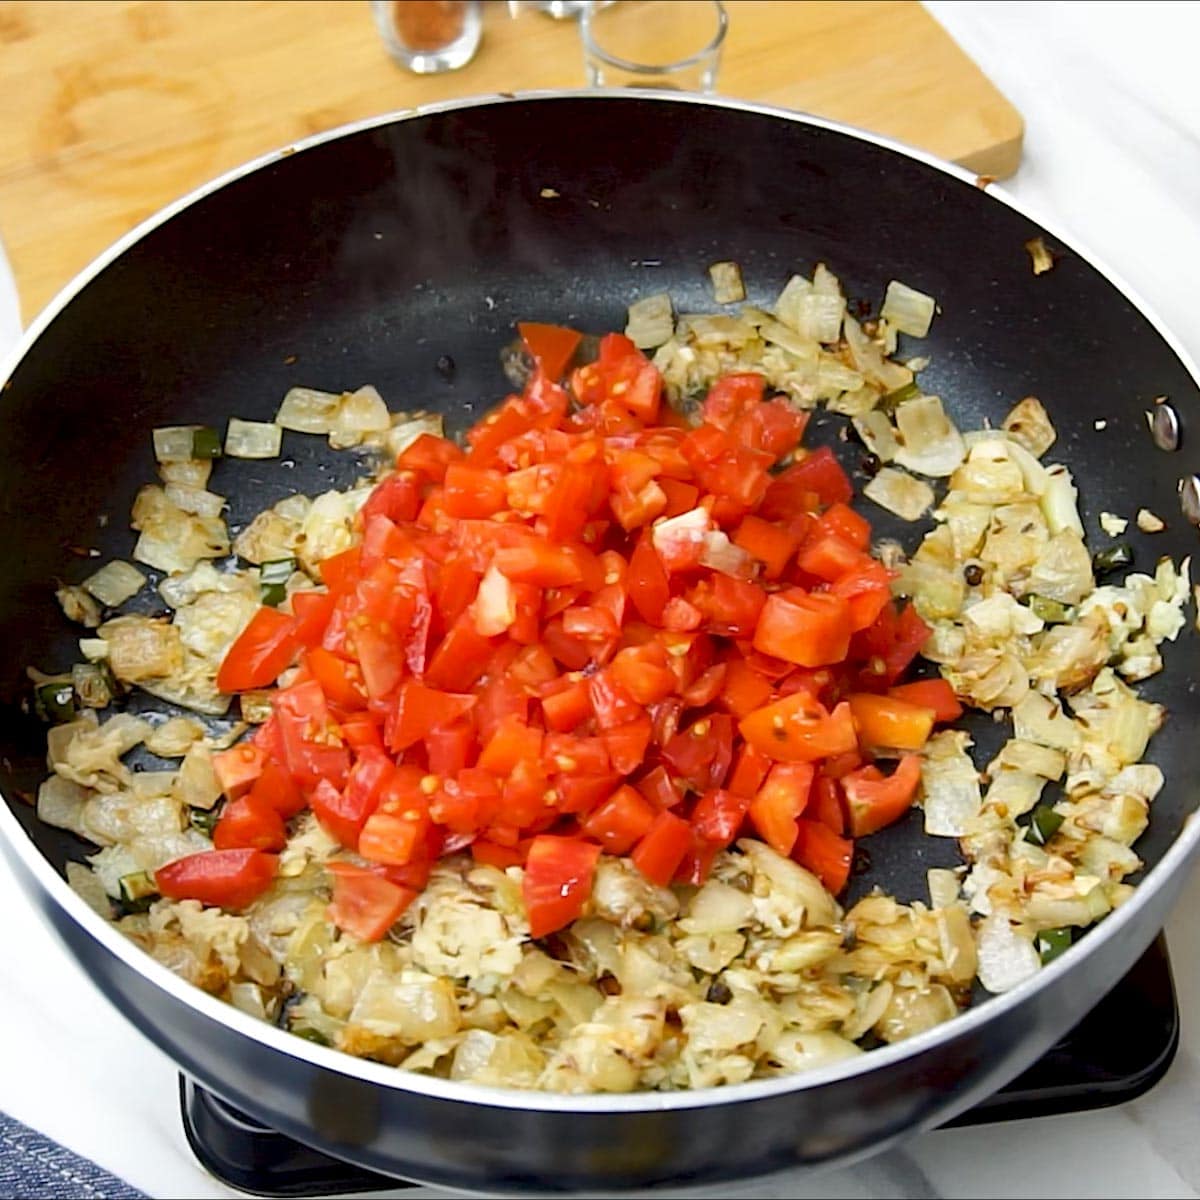 add diced tomatoes to the pan